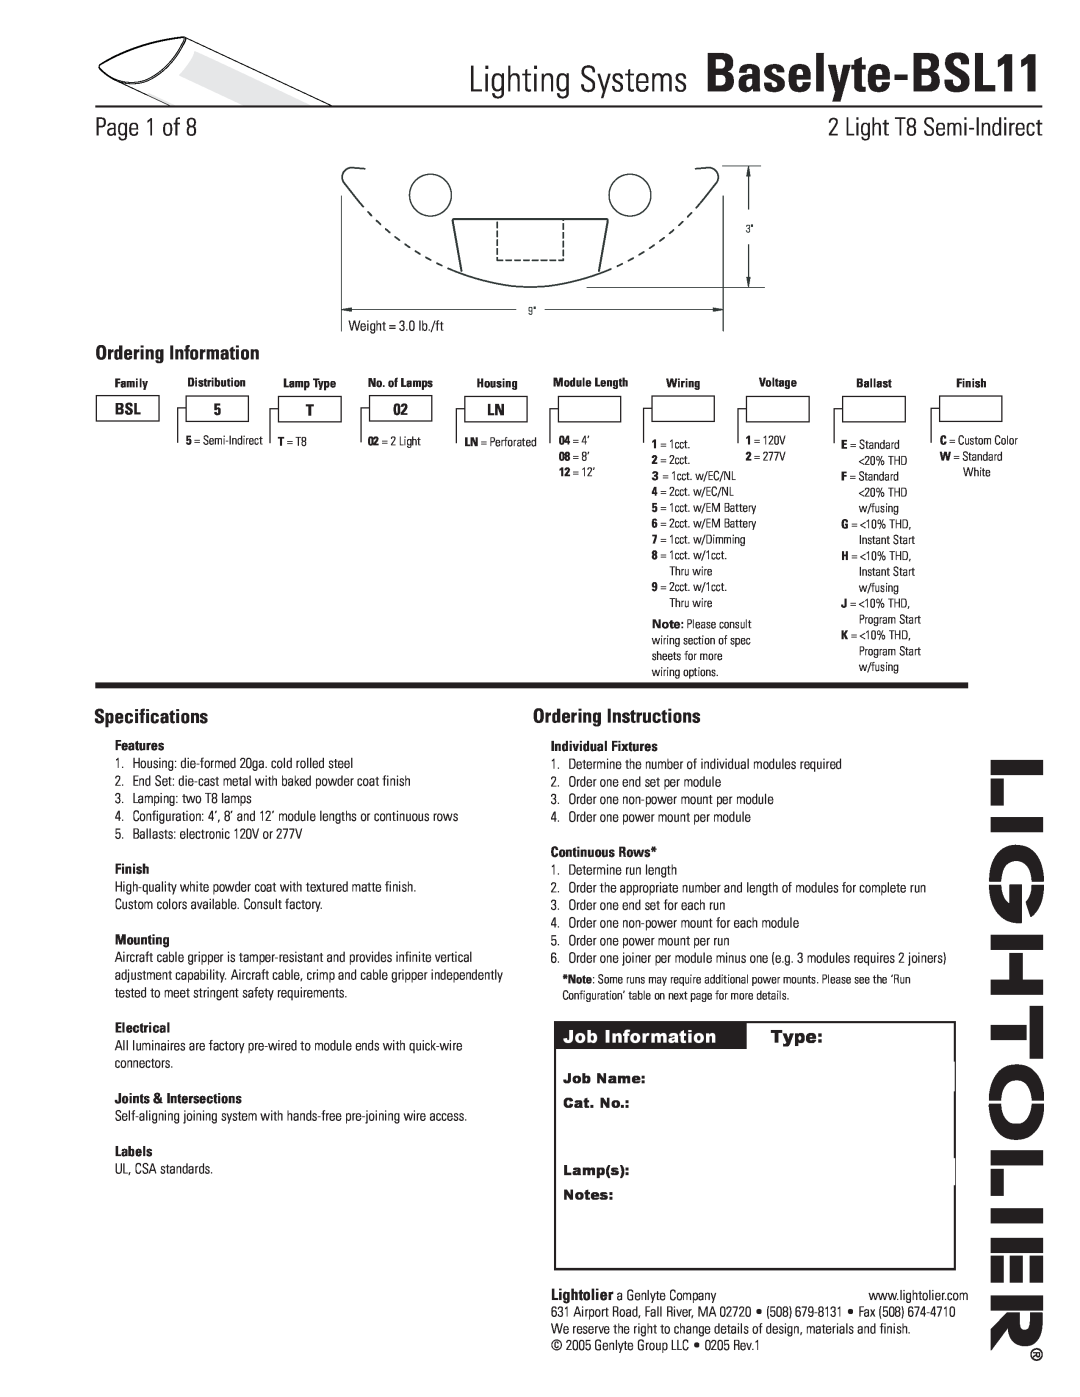 Lightolier specifications Lighting Systems Baselyte-BSL11, Page  of, Light T8 Semi-Indirect, Ordering Information 